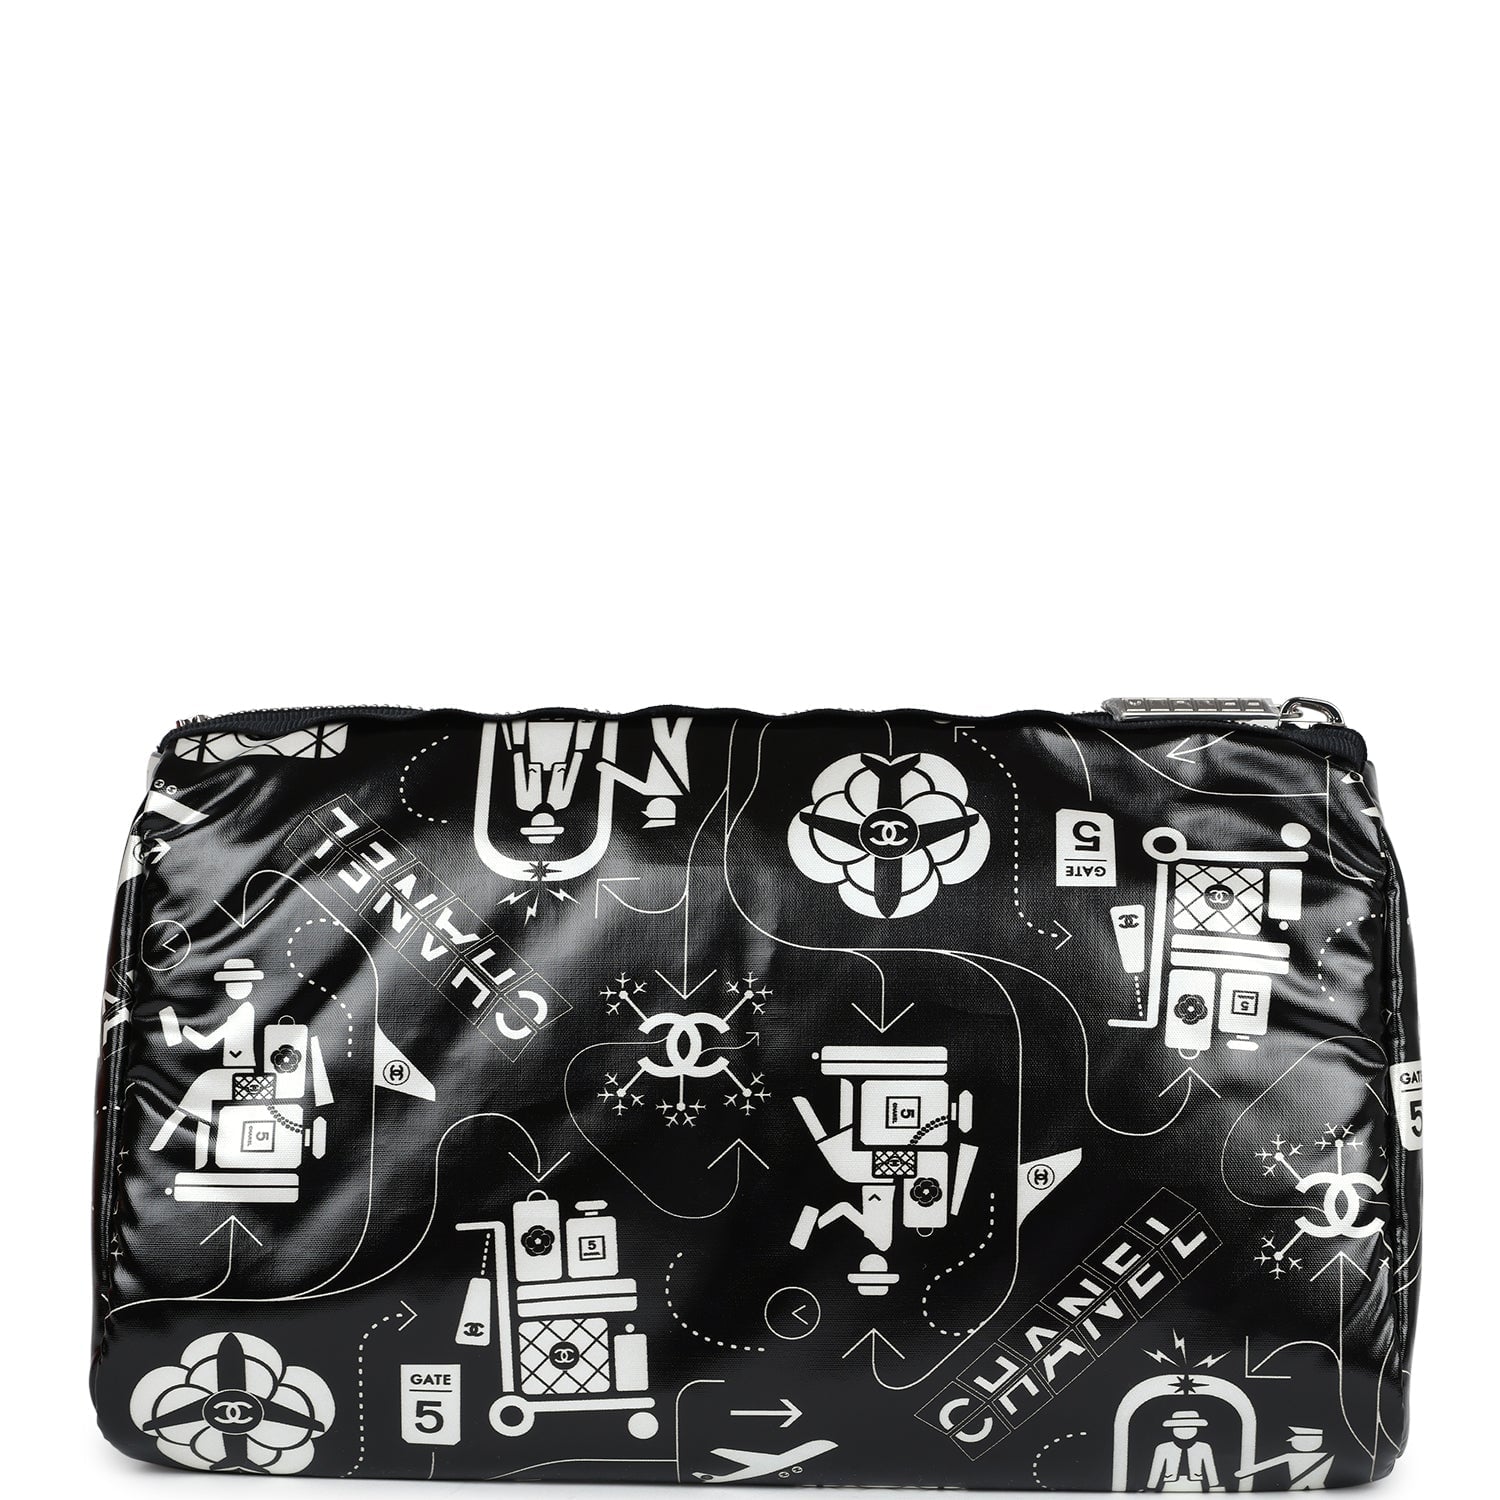 Chanel Small Airline Cosmetic Pouch Black and White Nylon Silver Hardware